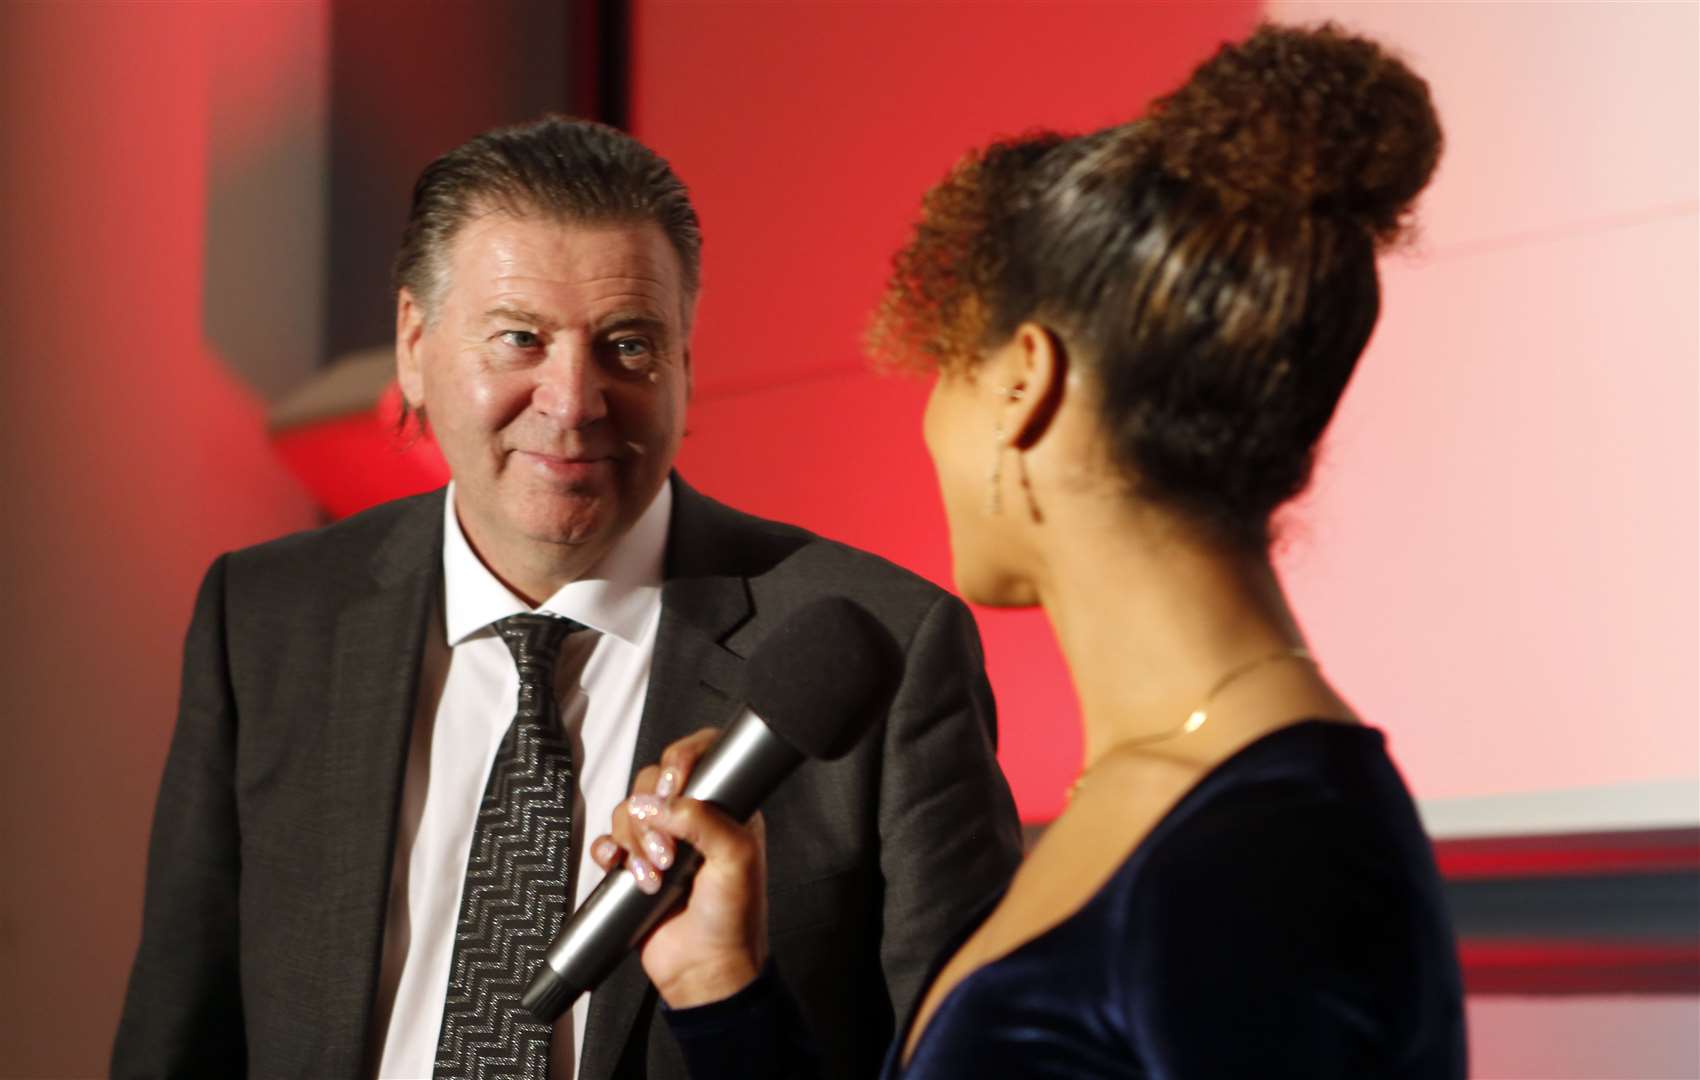 Special guest Chris Waddle is quizzed by Danusia Francis-Reid. Picture: Nick Johnson / Medway Council